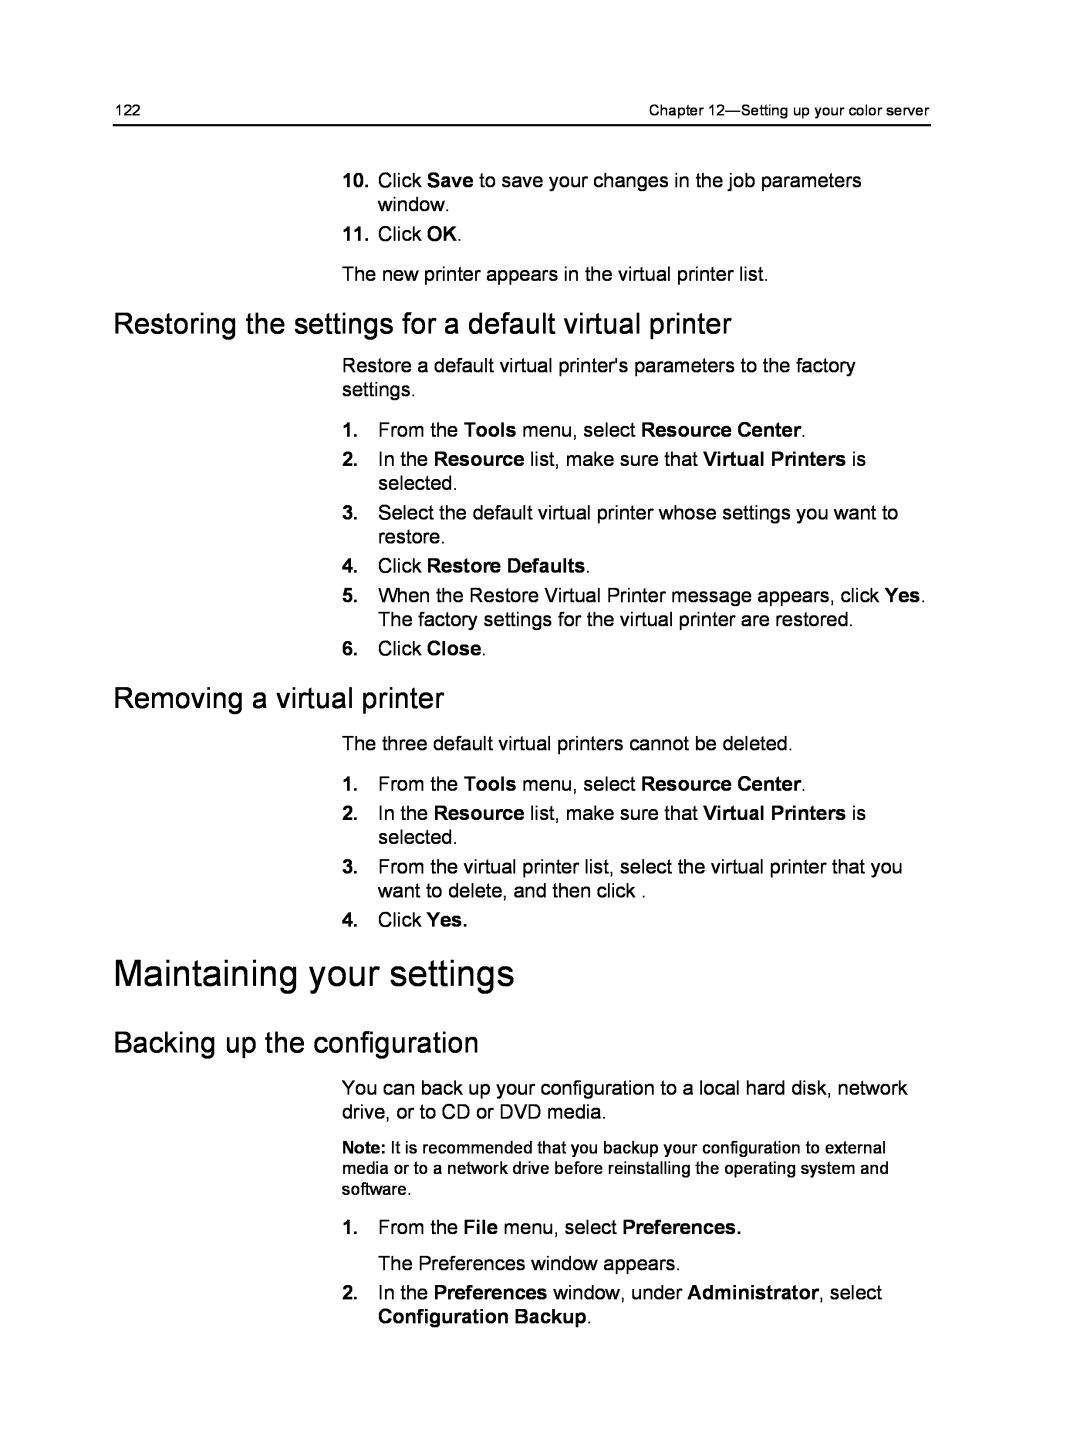 Xerox 560, 550 Maintaining your settings, Removing a virtual printer, Backing up the configuration, Click Restore Defaults 